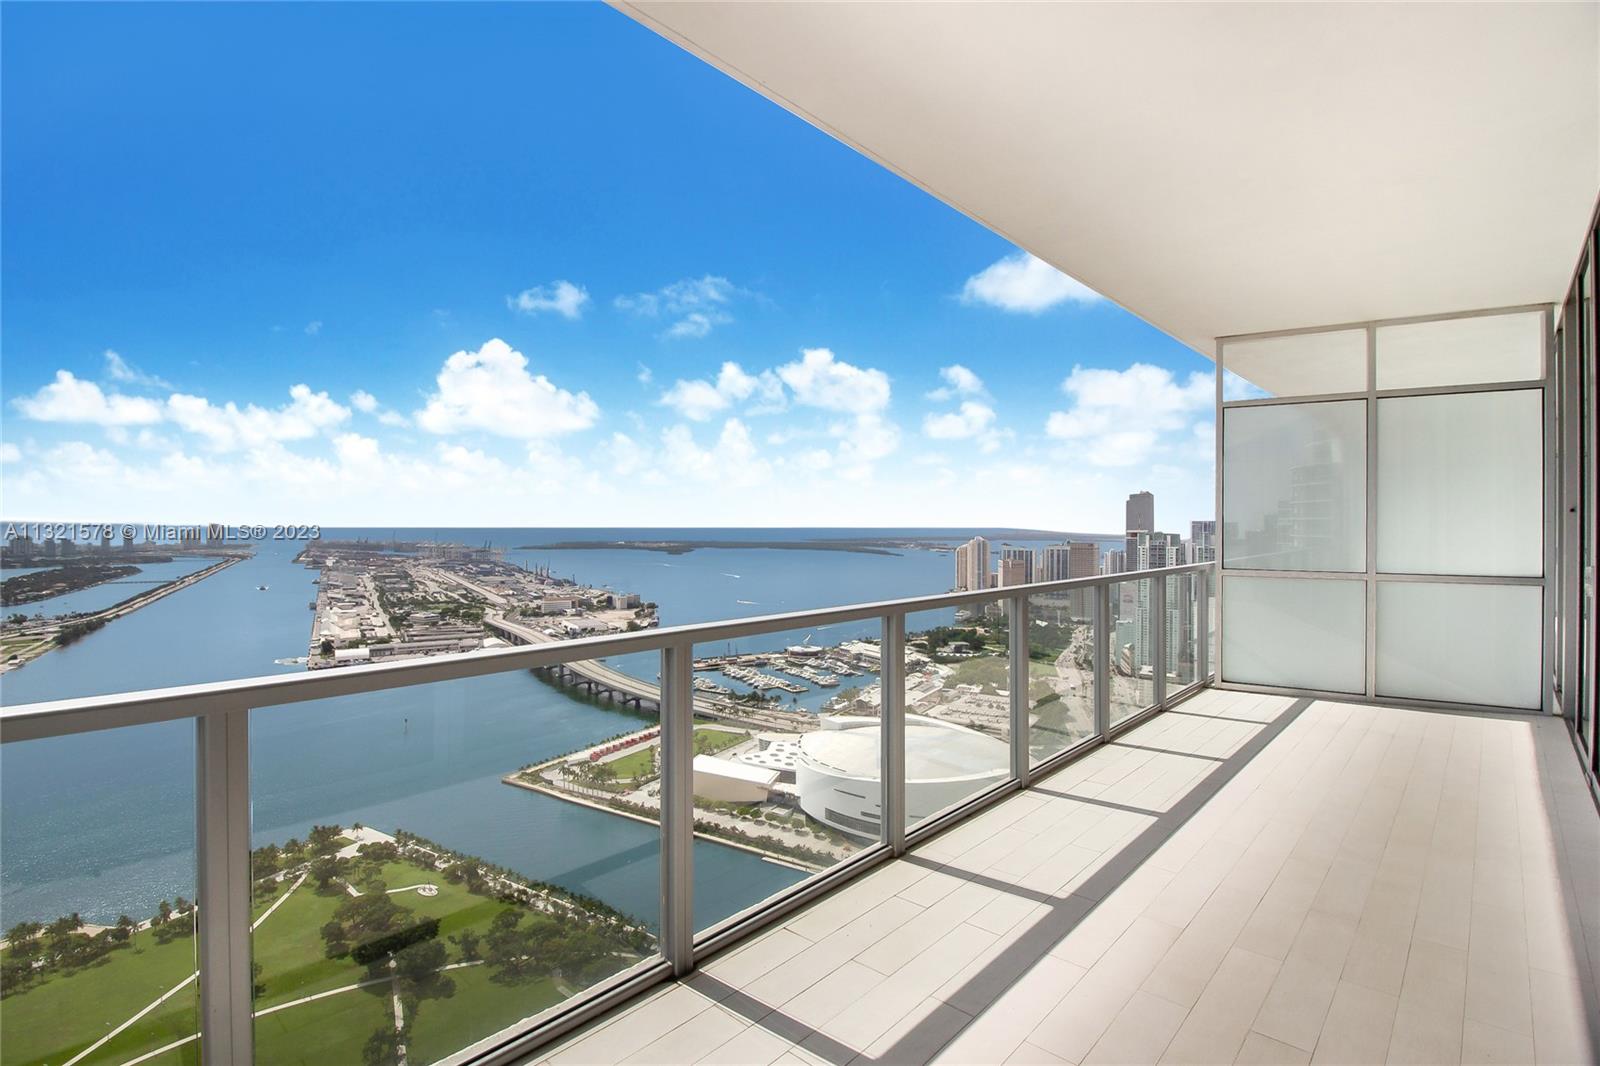 Best priced high floor DIRECT EAST view.  This is a true "home in the sky" and for under $800 per sq ft!!! Downtown Miami Is the fastest growing and developing neighborhood in Miami, and all of the new buildings have obstructed views for twice the price.  Make this your true Miami dream home and grab this opportunity.  Private elevator entrance, hotel style amenities and prime location.  Get to the airport, Miami Beach, design district, Wynwood within minutes. Storage unit included and new A/C unit